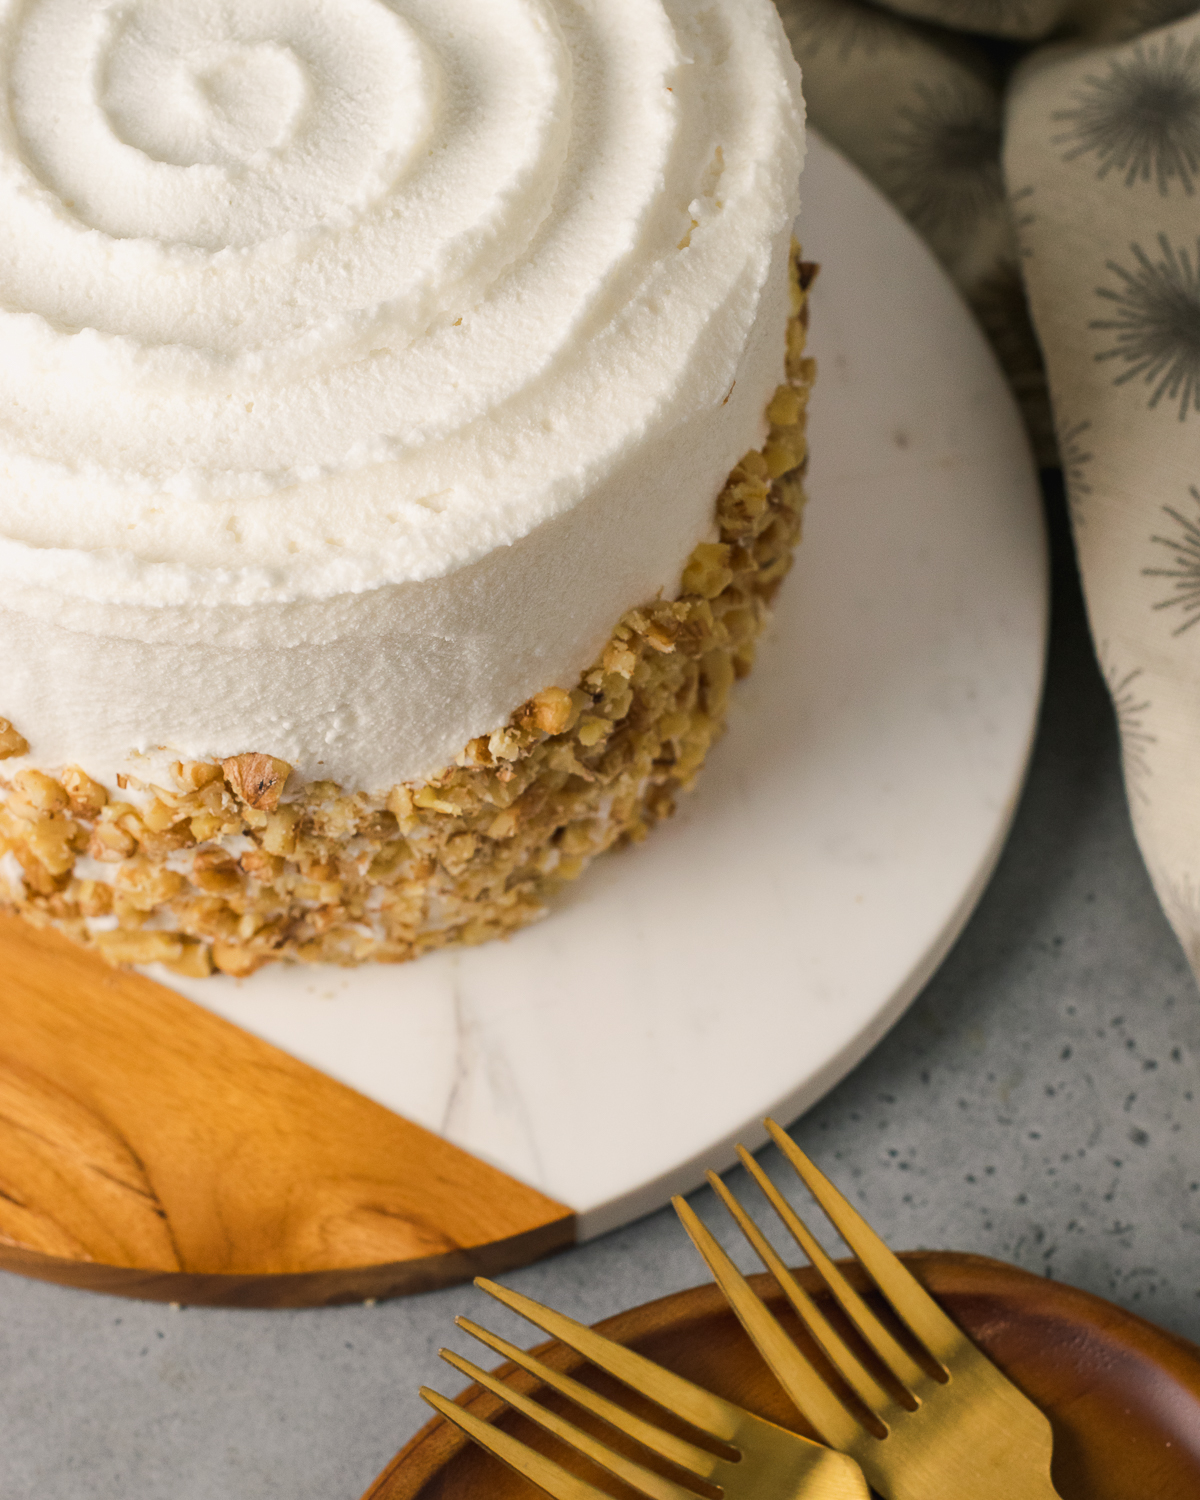 Decorated gluten free carrot cake with walnuts.